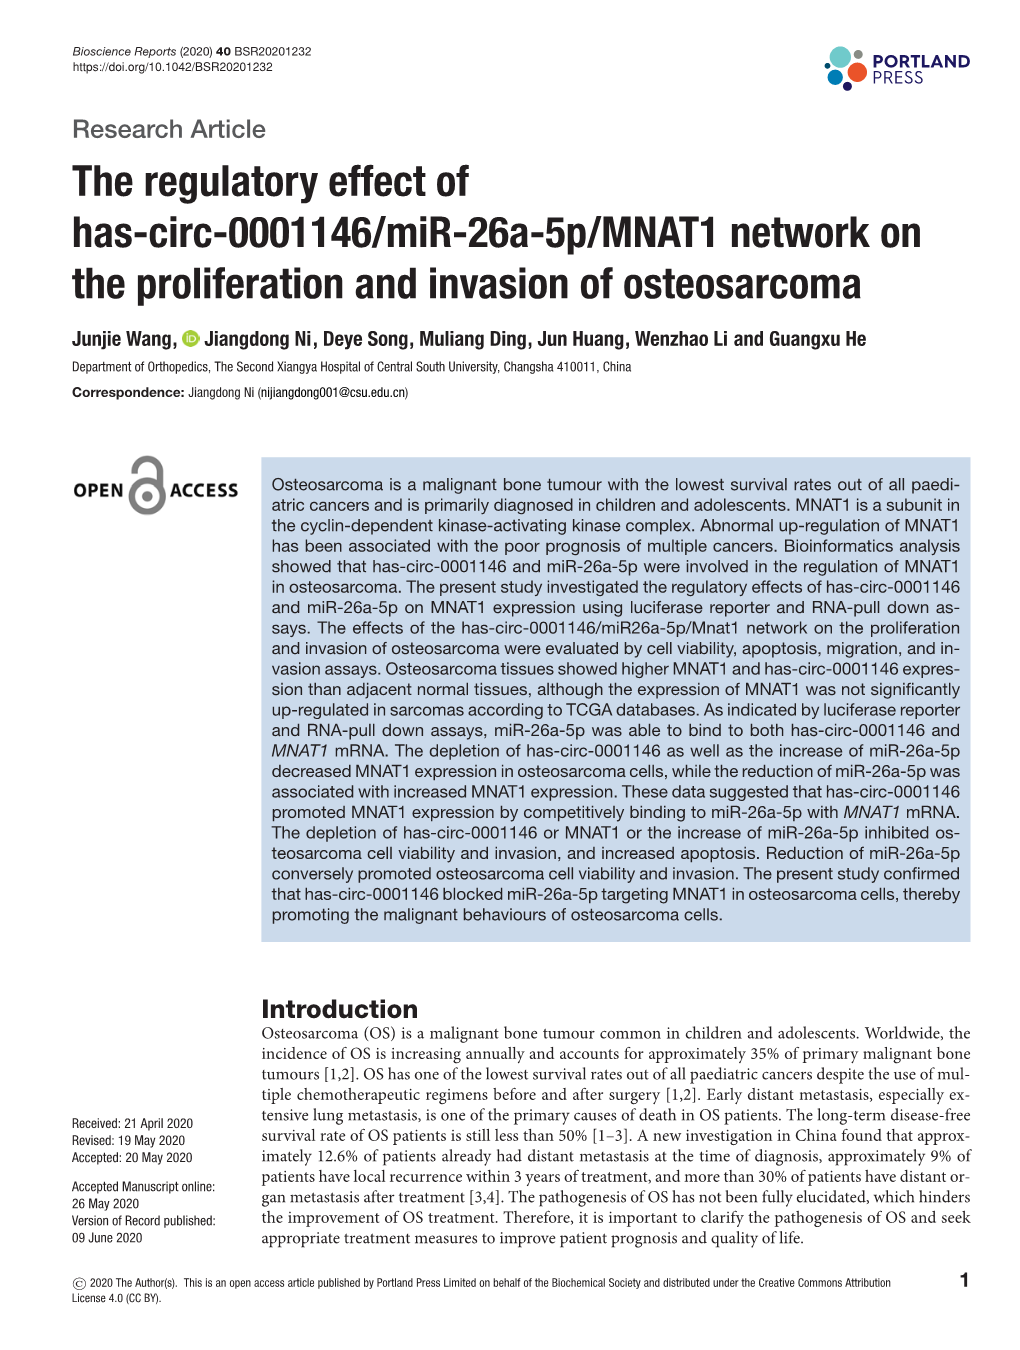 The Regulatory Effect of Has-Circ-0001146/Mir-26A-5P/MNAT1 Network on the Proliferation and Invasion of Osteosarcoma